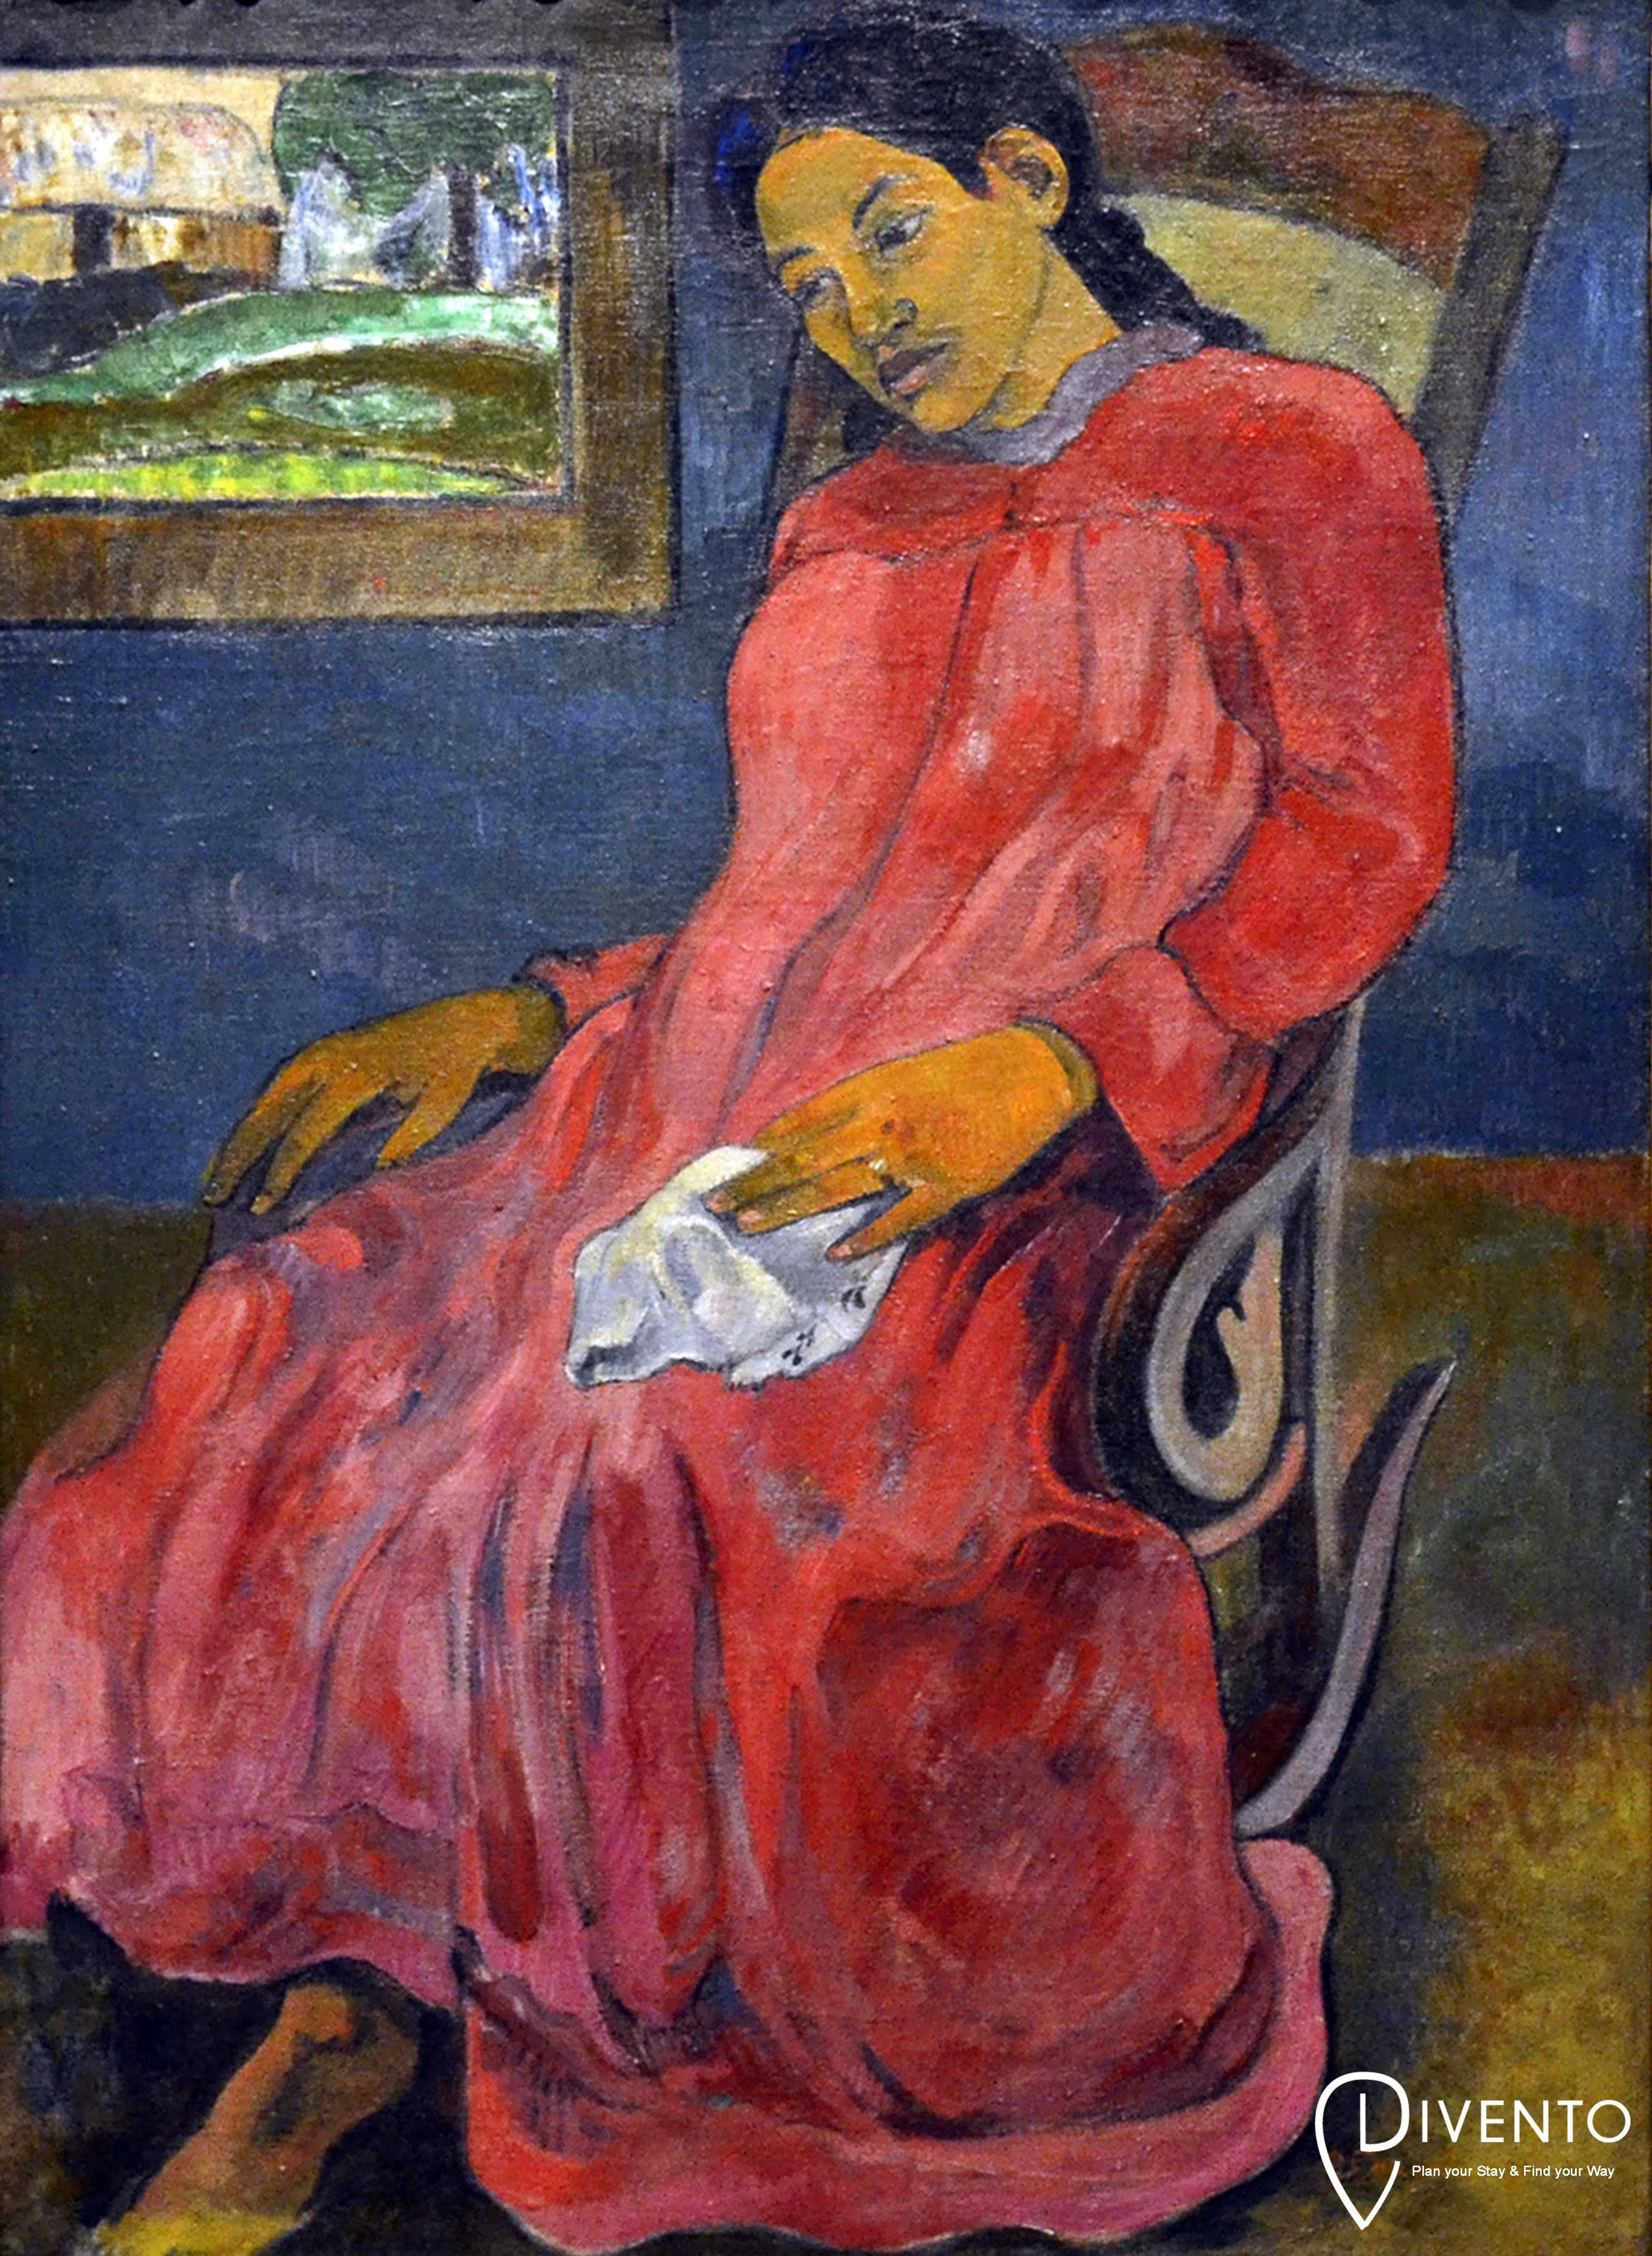 Gauguin Portraits, Exhibition, National Gallery, London: 7 October 2019 - 26 January 2020